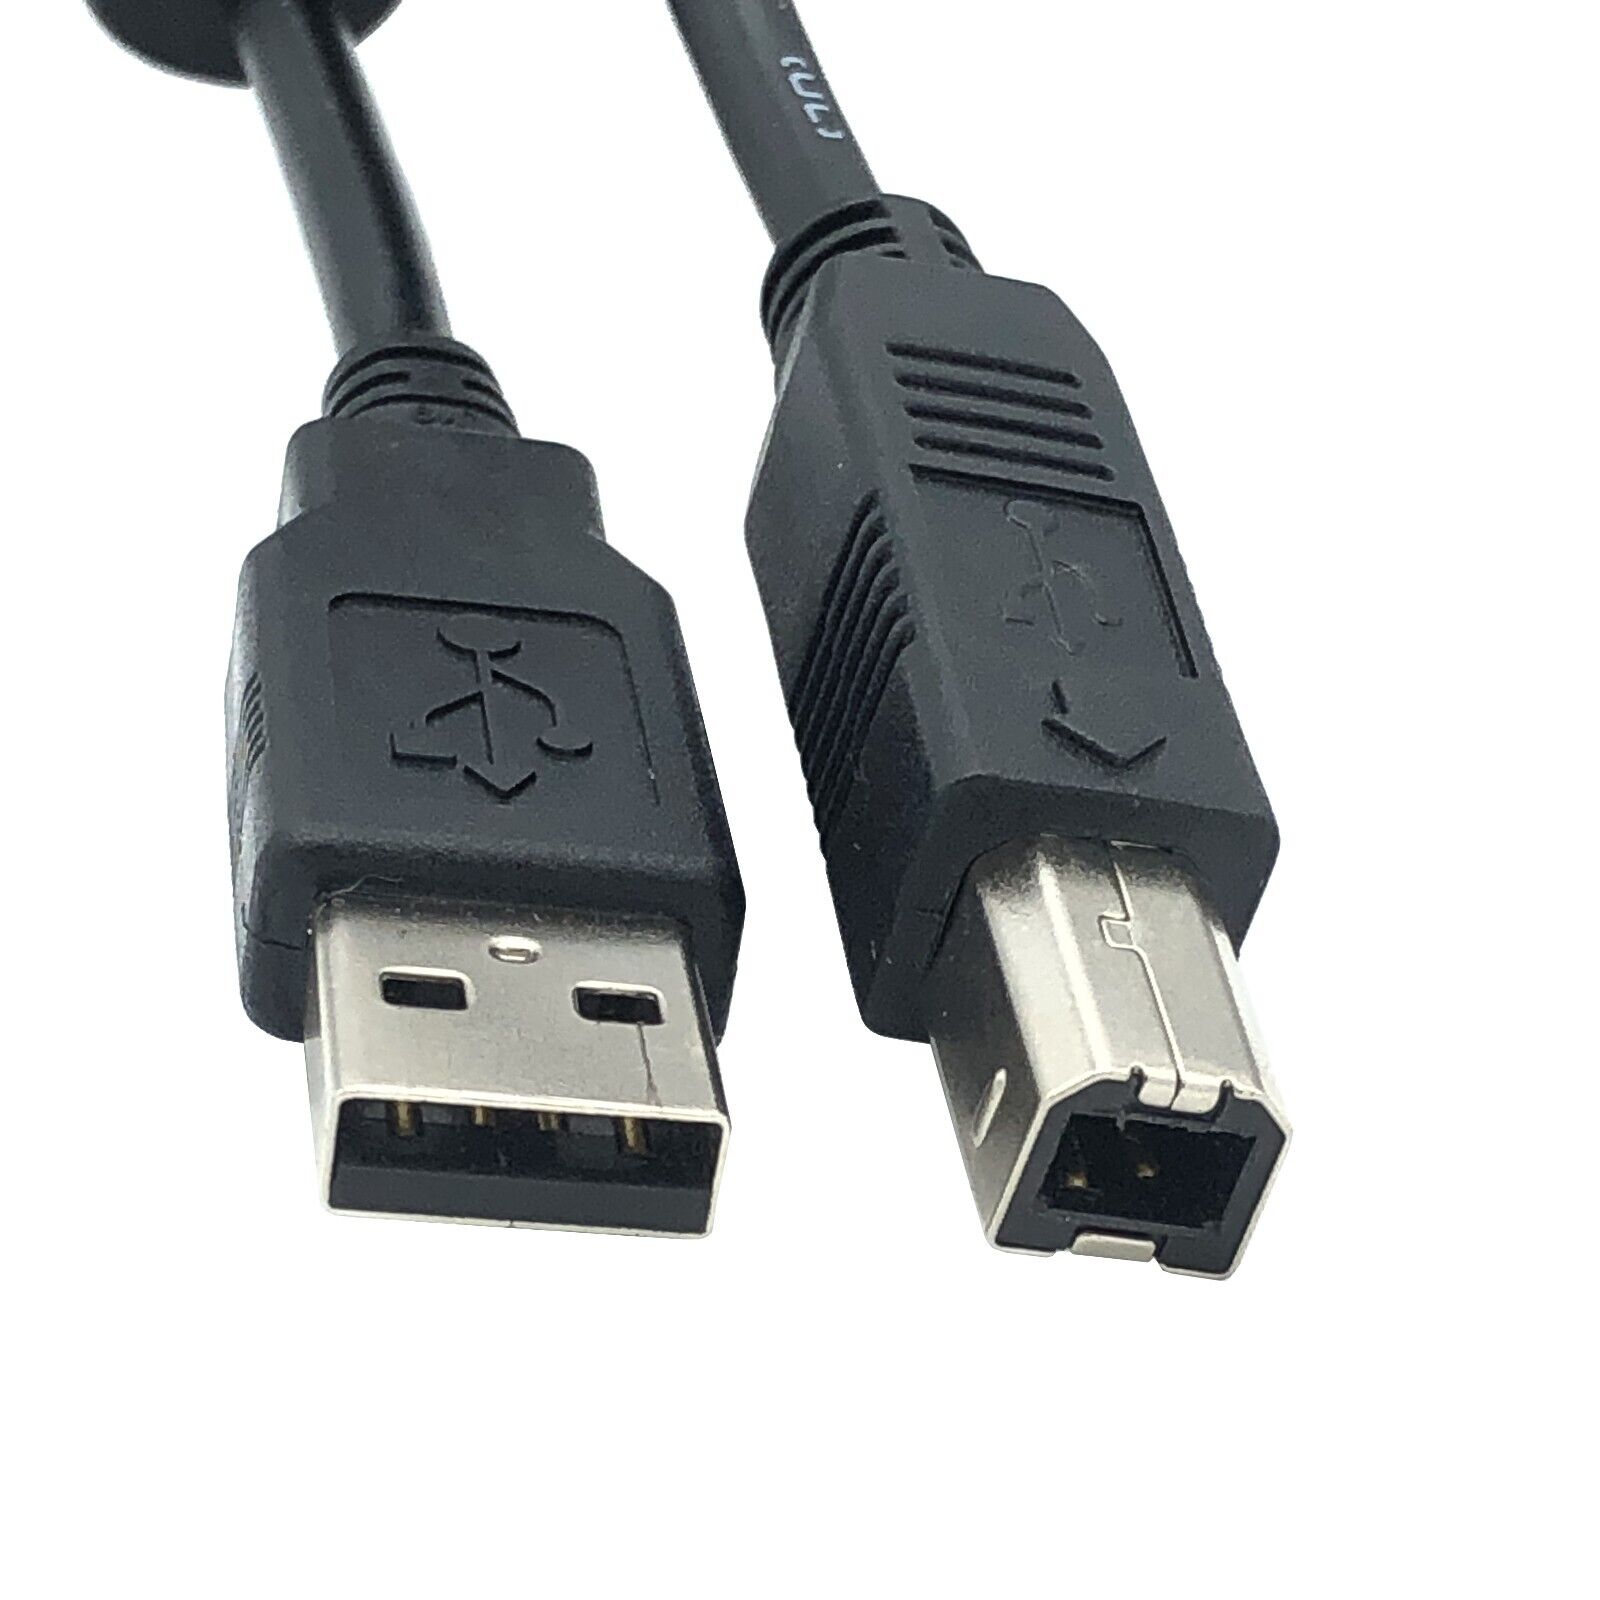 Branded USB 2.0 Cord Cable Audient iD4 2-in/2-out id-4 id22 USB Audio Interface